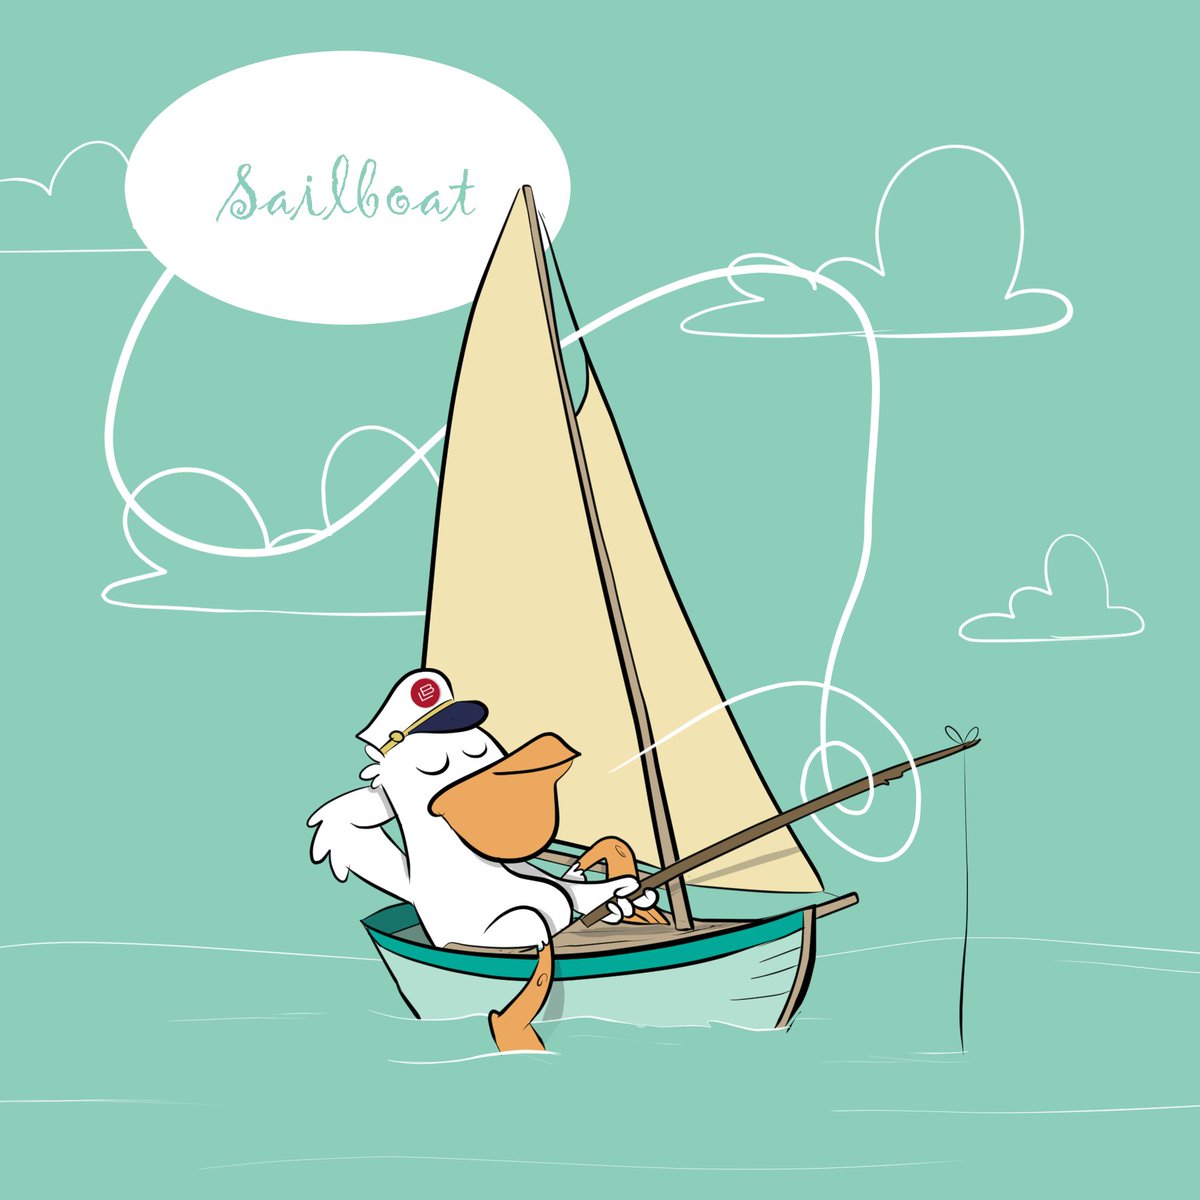 It's #AnimalAlphabets time, and the word for this week is ‘Sailboat’. ⛵

@animalalphabets #characterdesign #sailboat